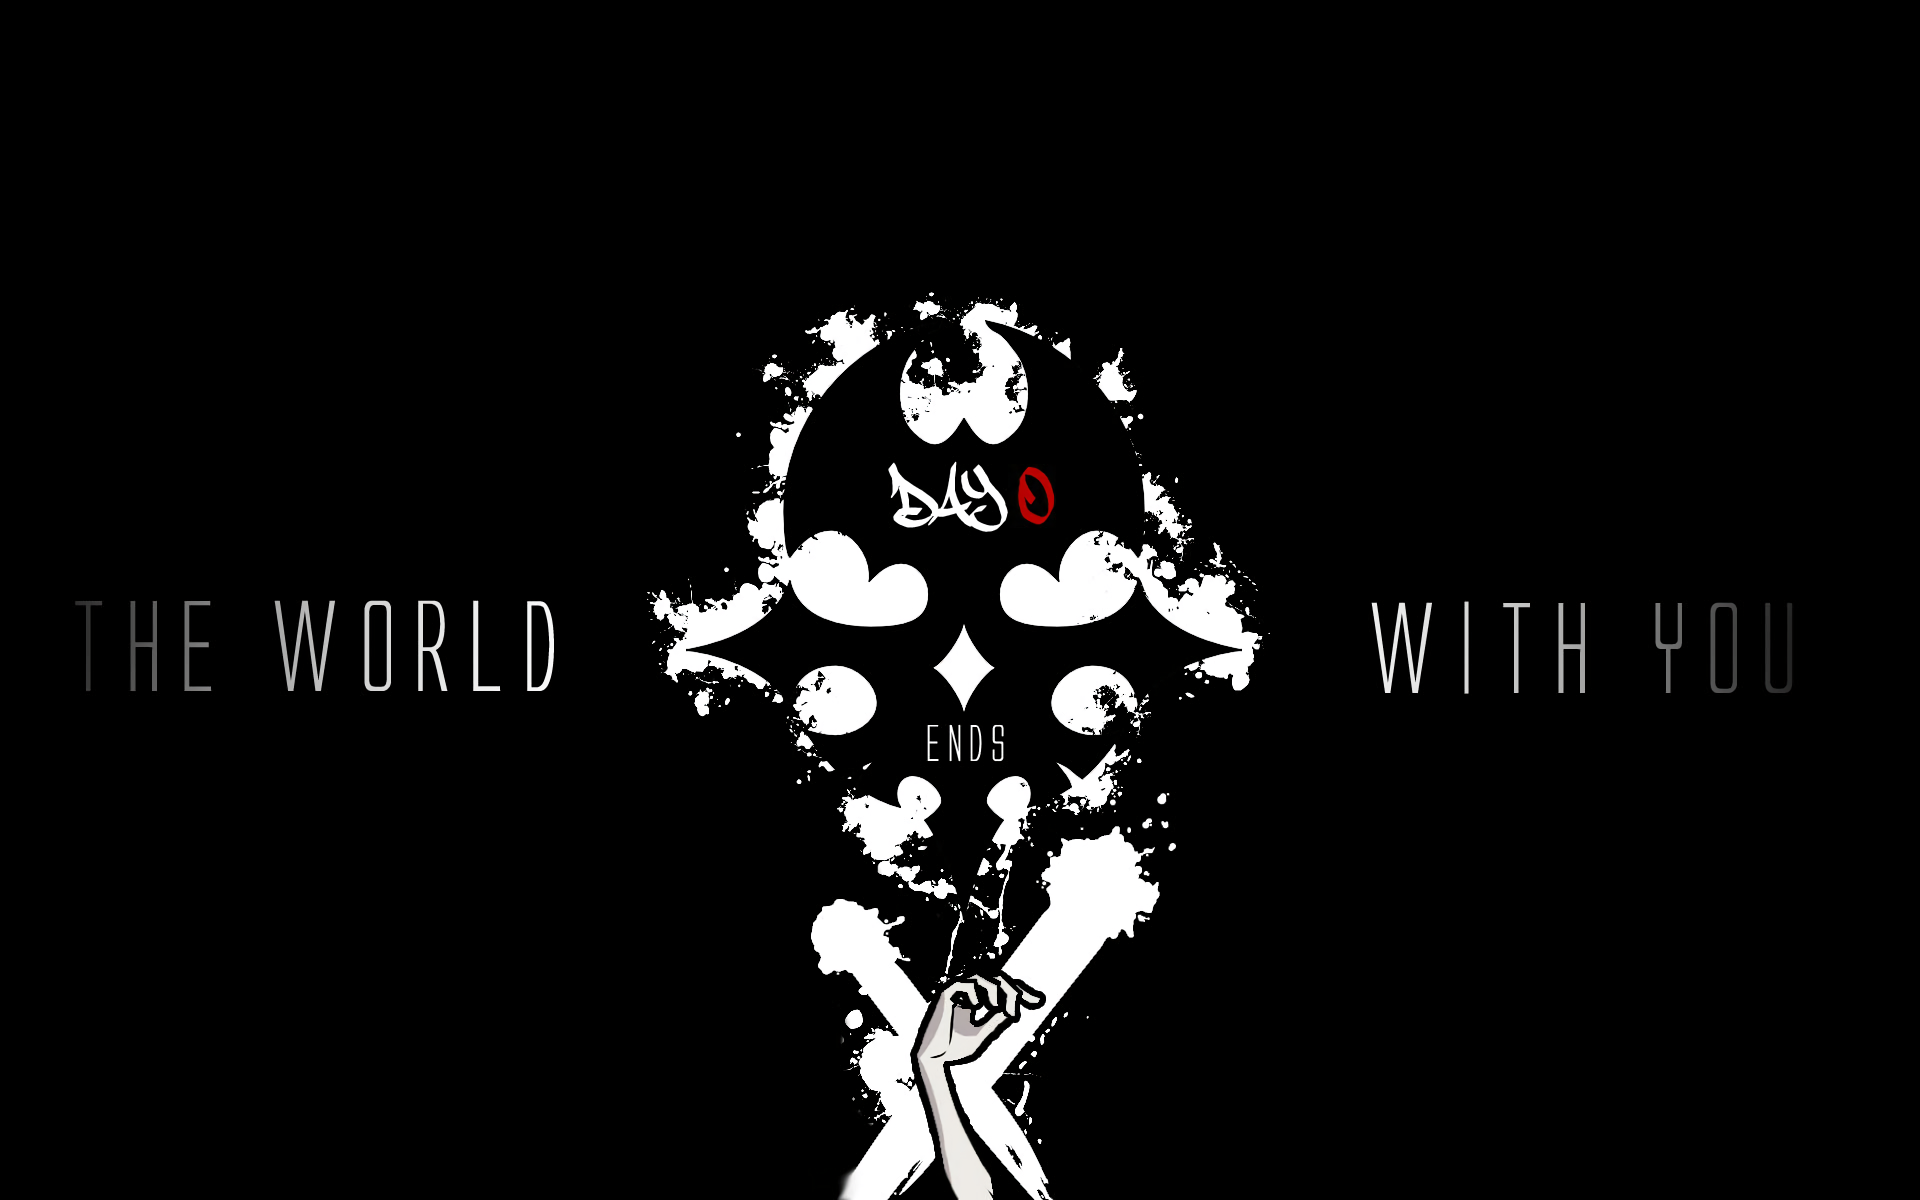 Video Game The World Ends With You 1920x1200